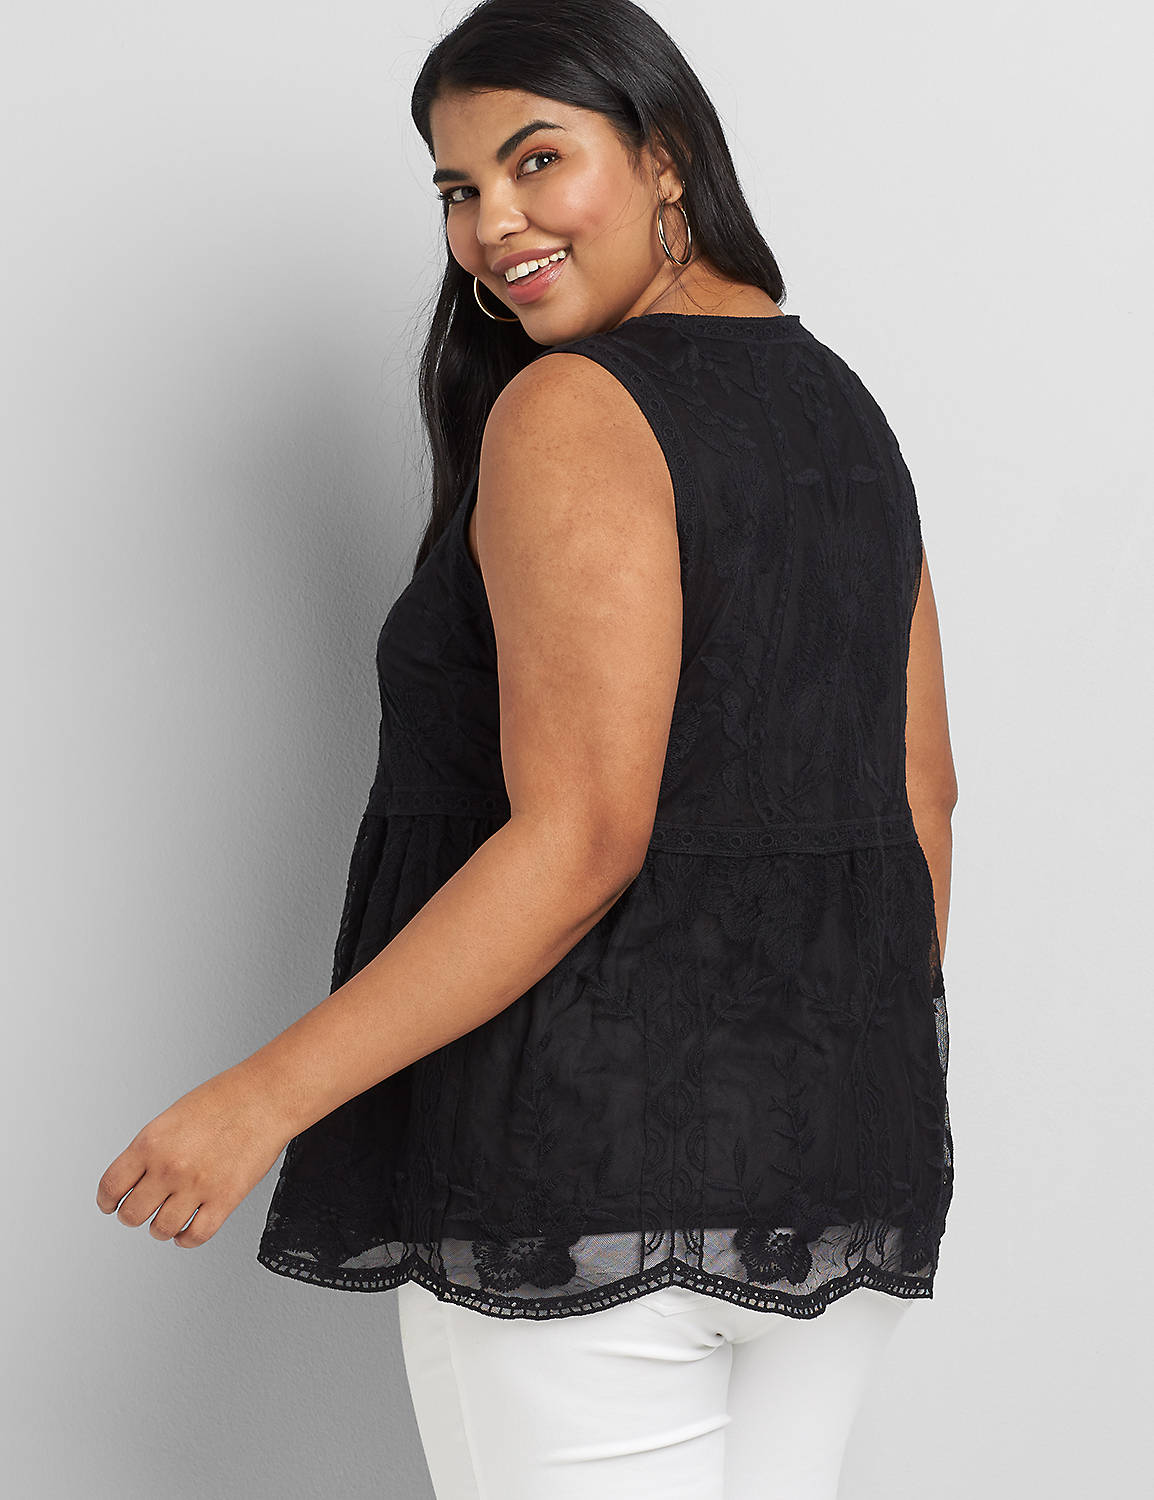 Sleeveless Crew Neck Baby Doll Embroidered Mesh 1118904:Ascena Black:22 Product Image 2